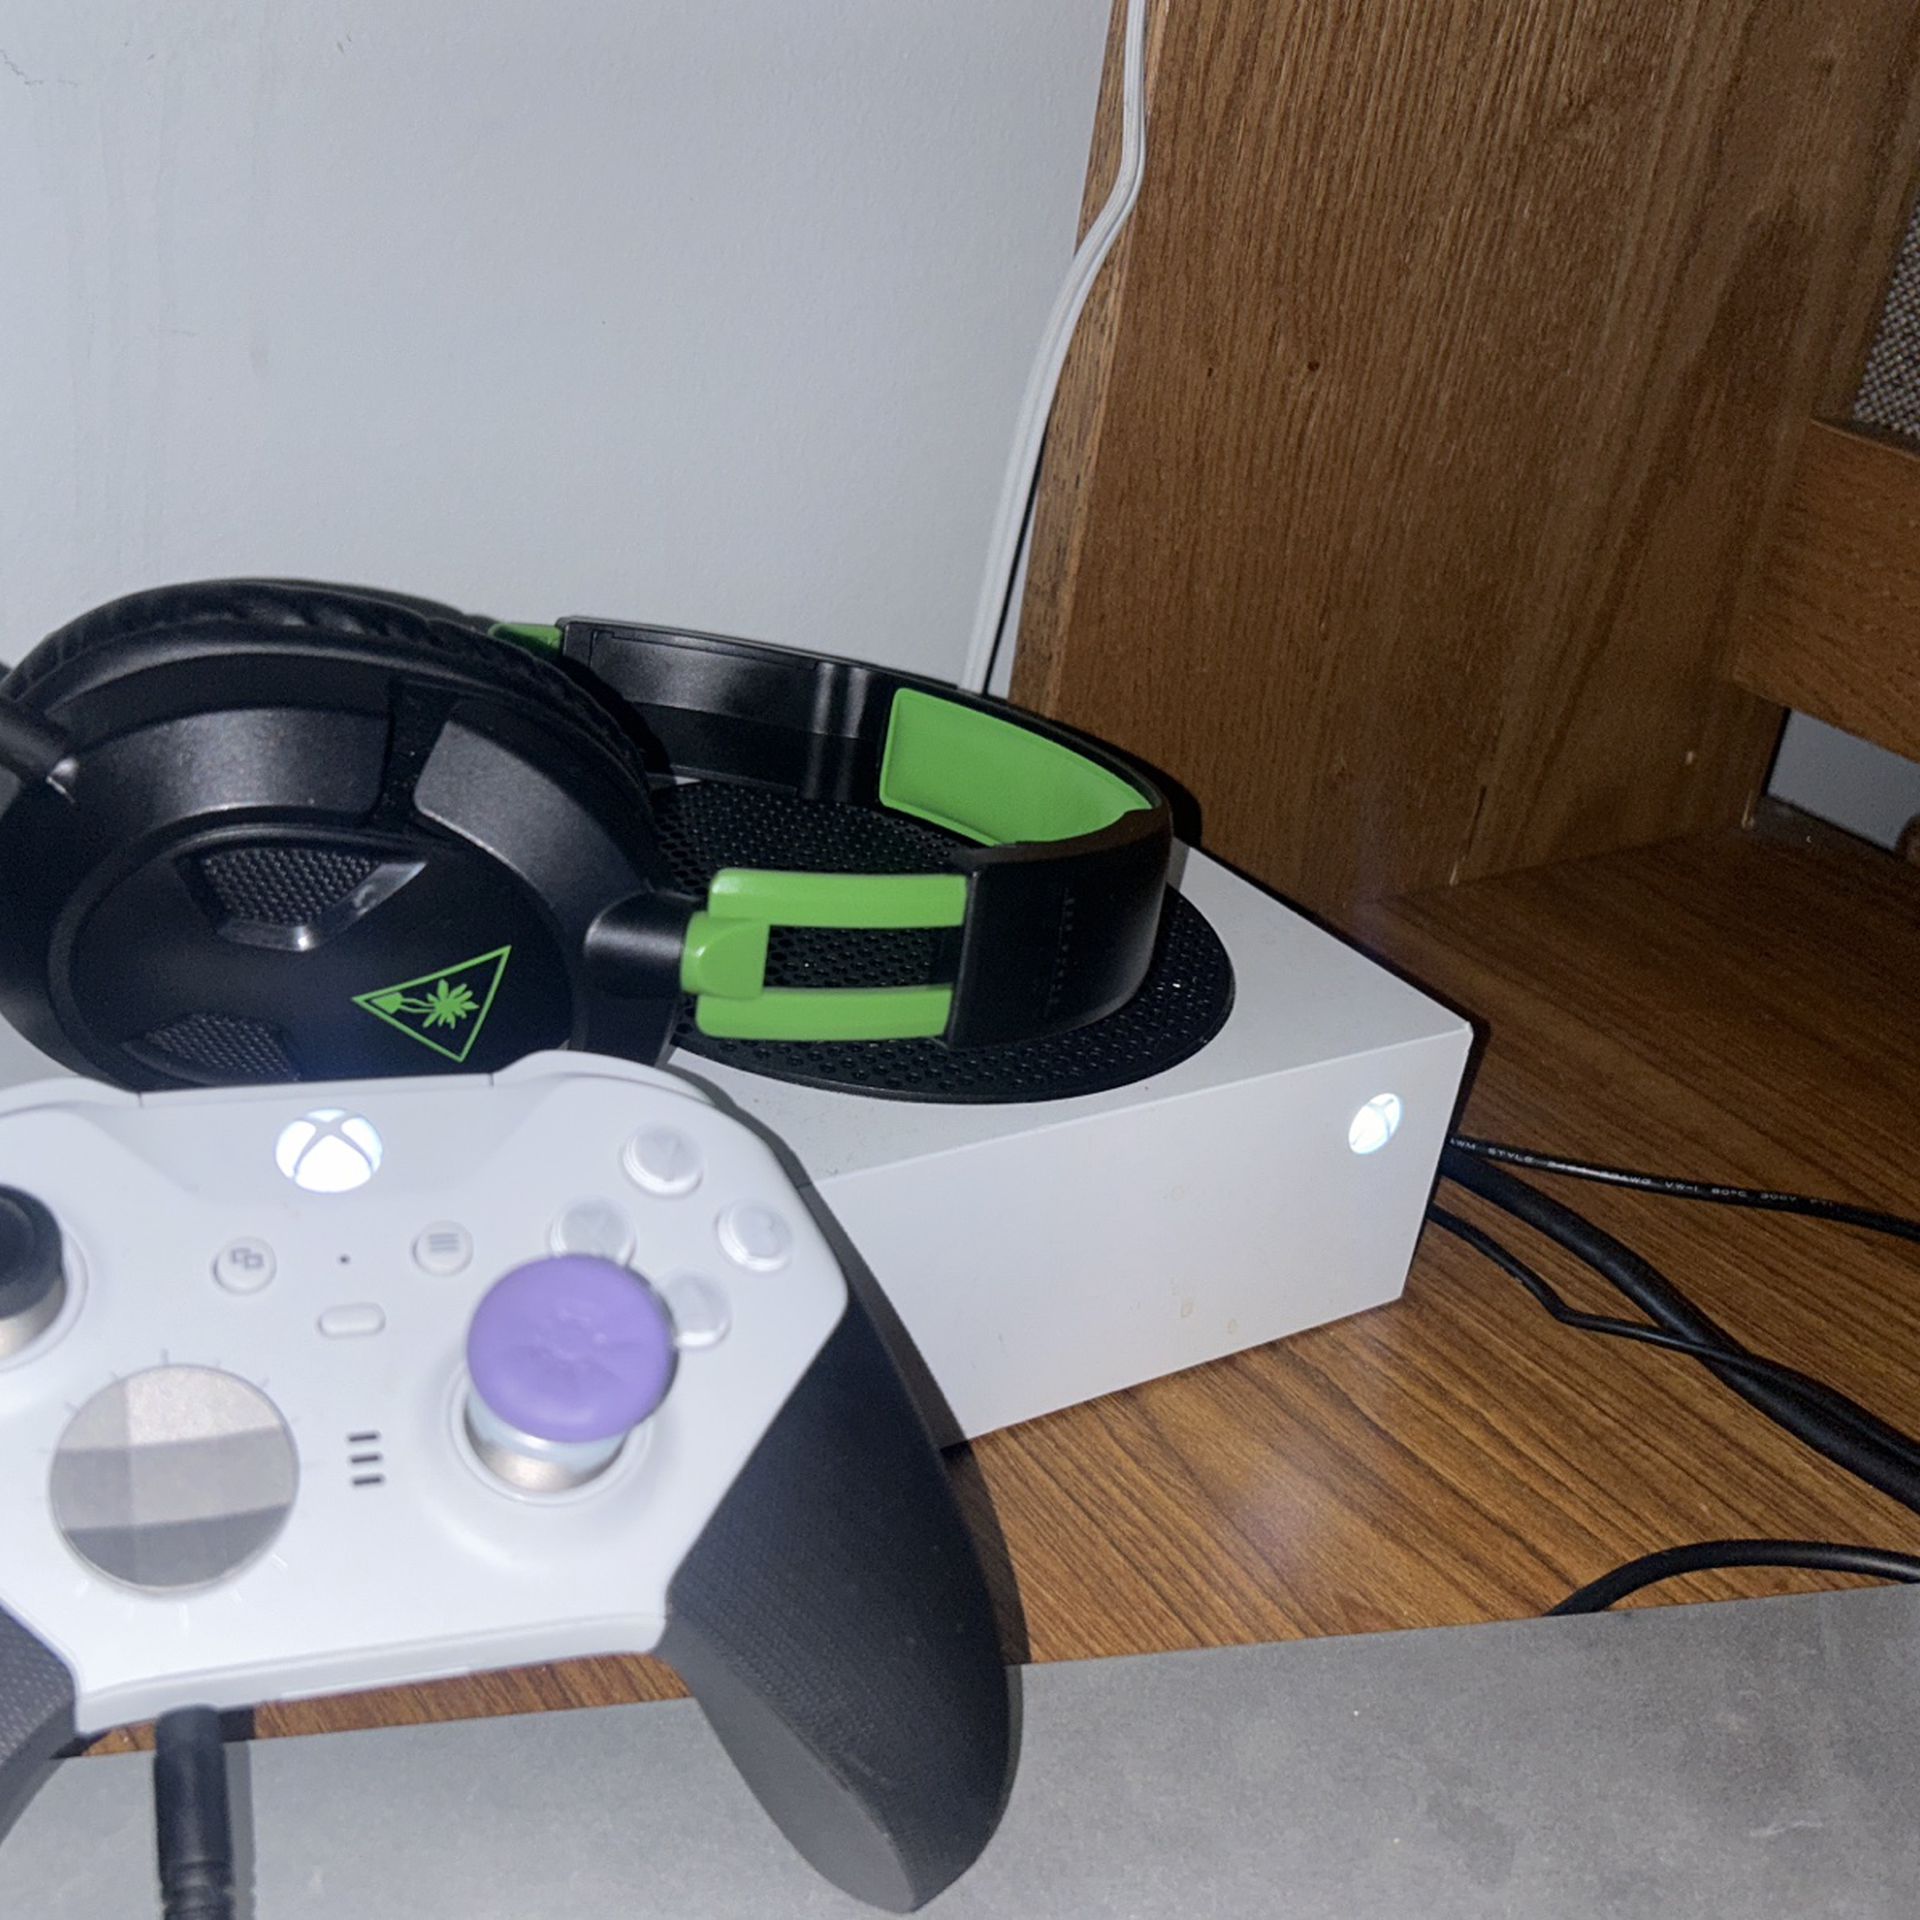 Used Xbox With Games And Elite Controller.